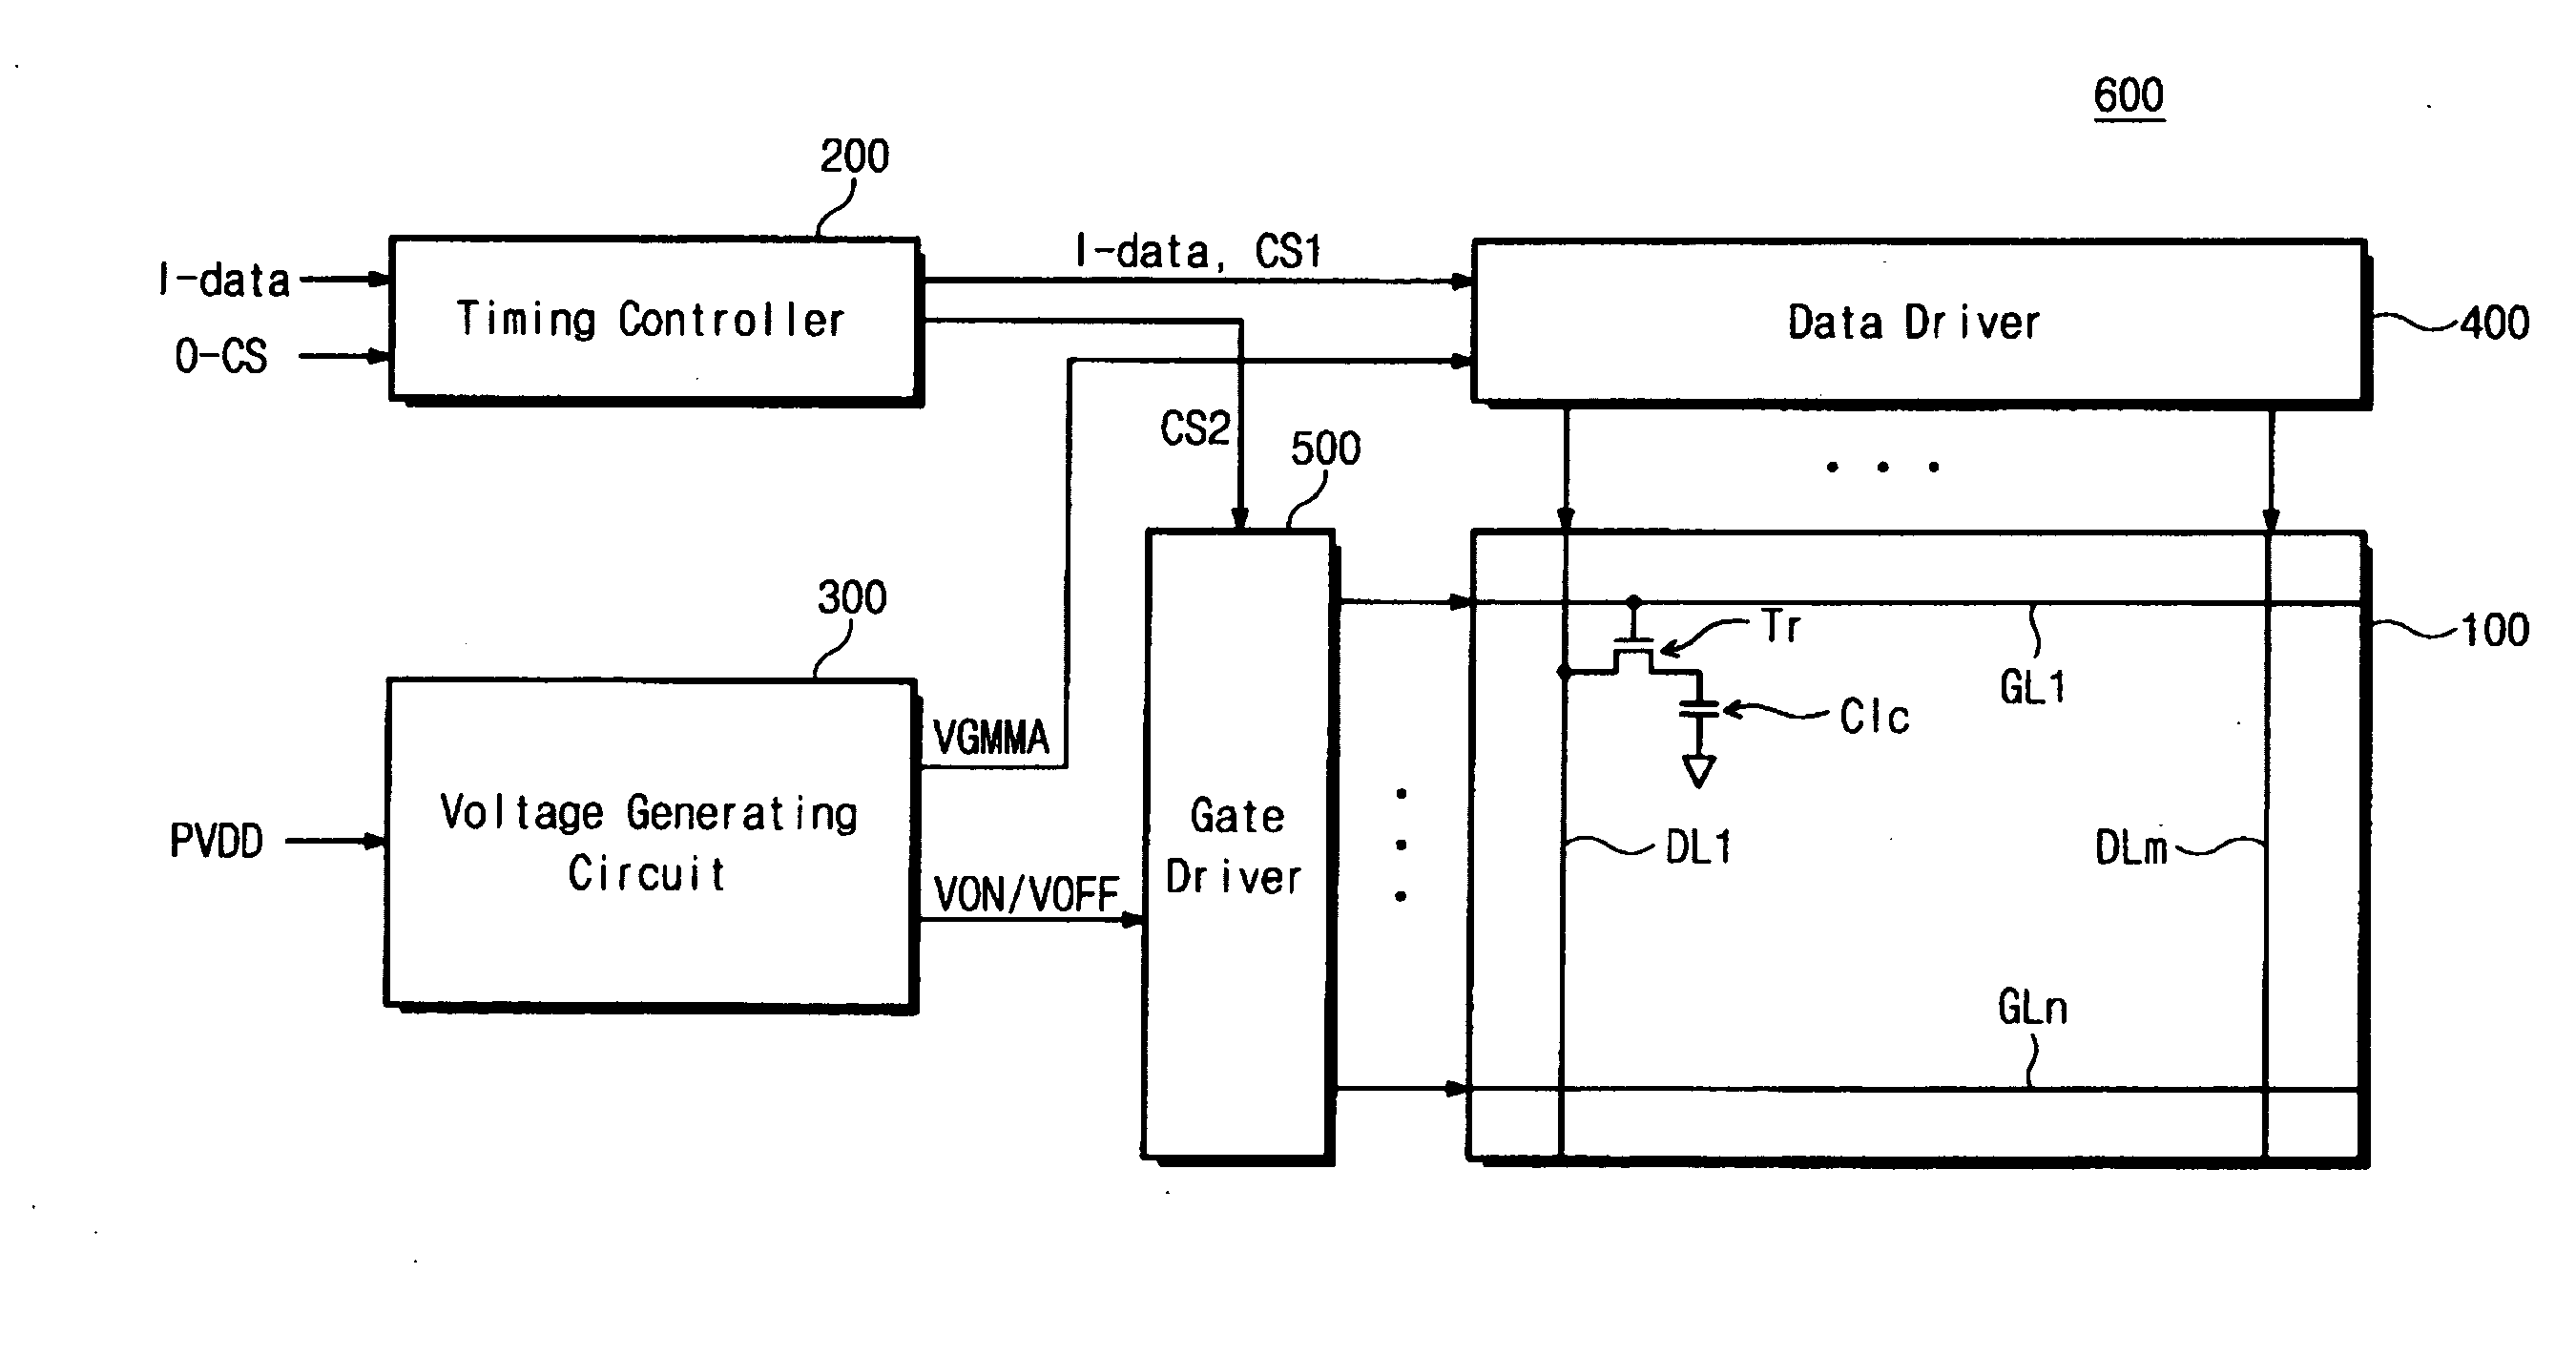 LCD voltage generating circuits